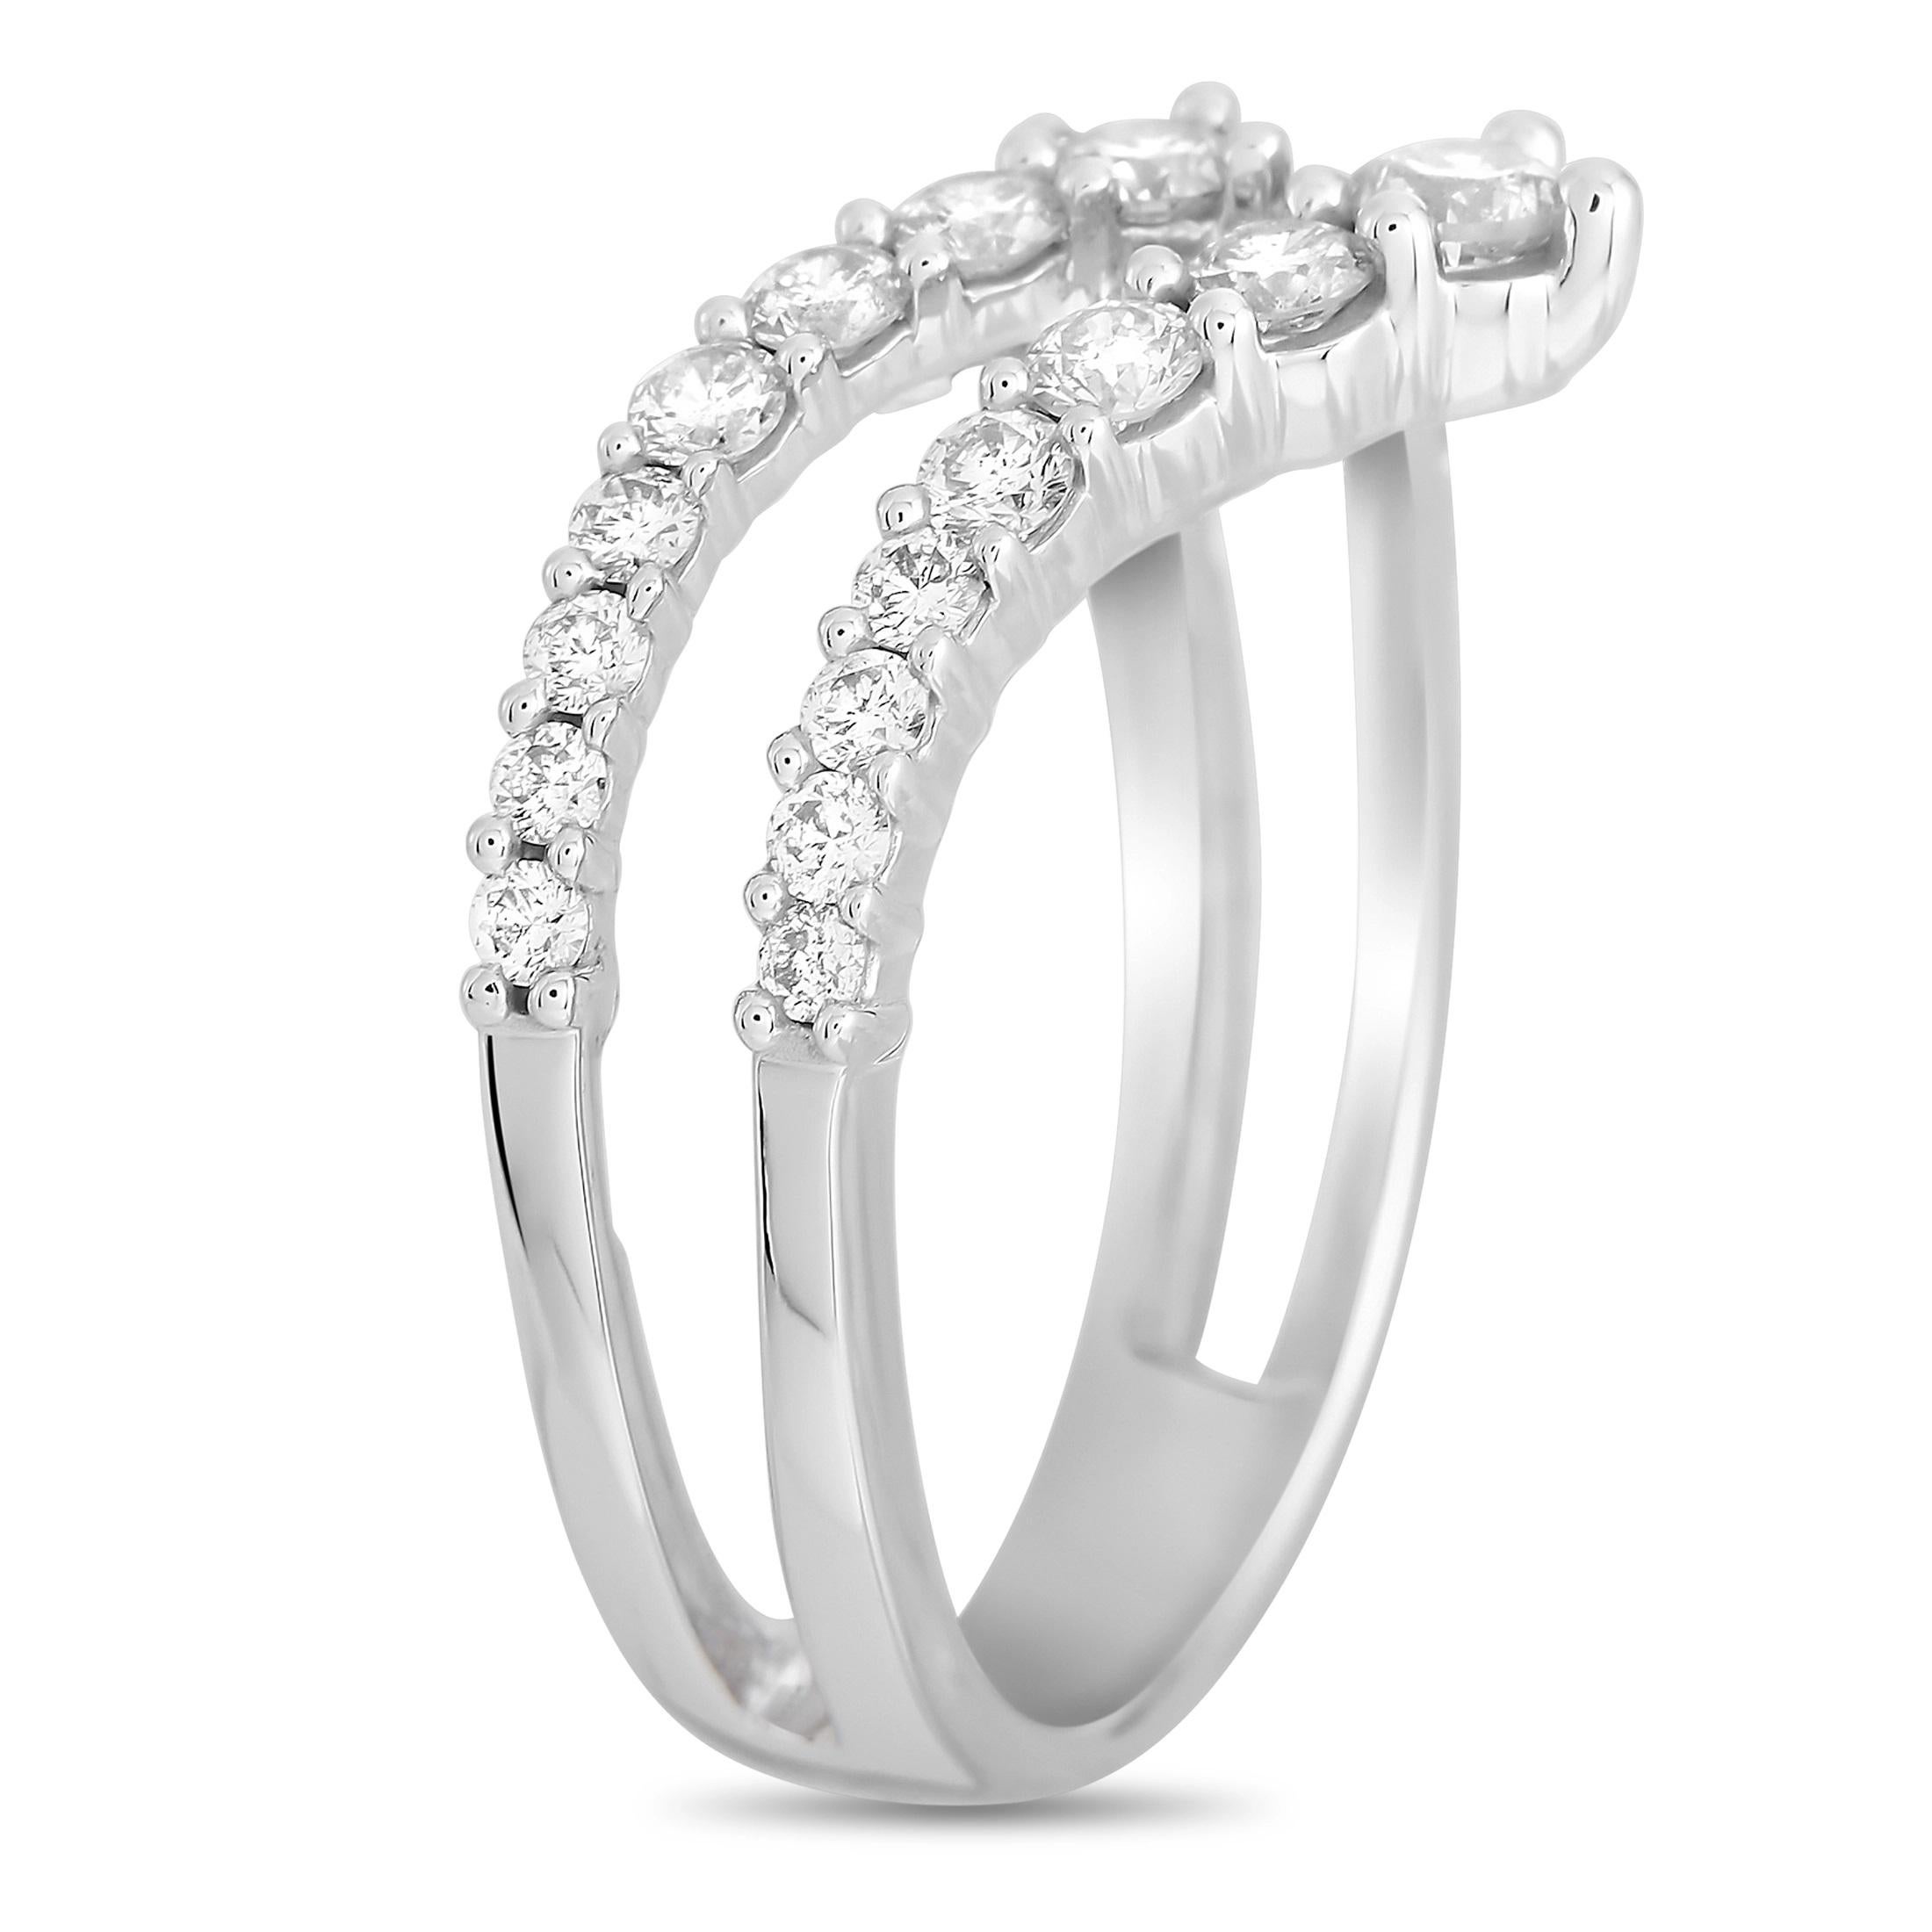 Crown your princess' finger with this glittering tiara-like ring. This sculpted bling features a slender double v-shaped band lined with glittering diamonds. The LB Exclusive 14K White Gold 0.75 ct Diamond Tiara Ring has a 3mm top height and an 11mm